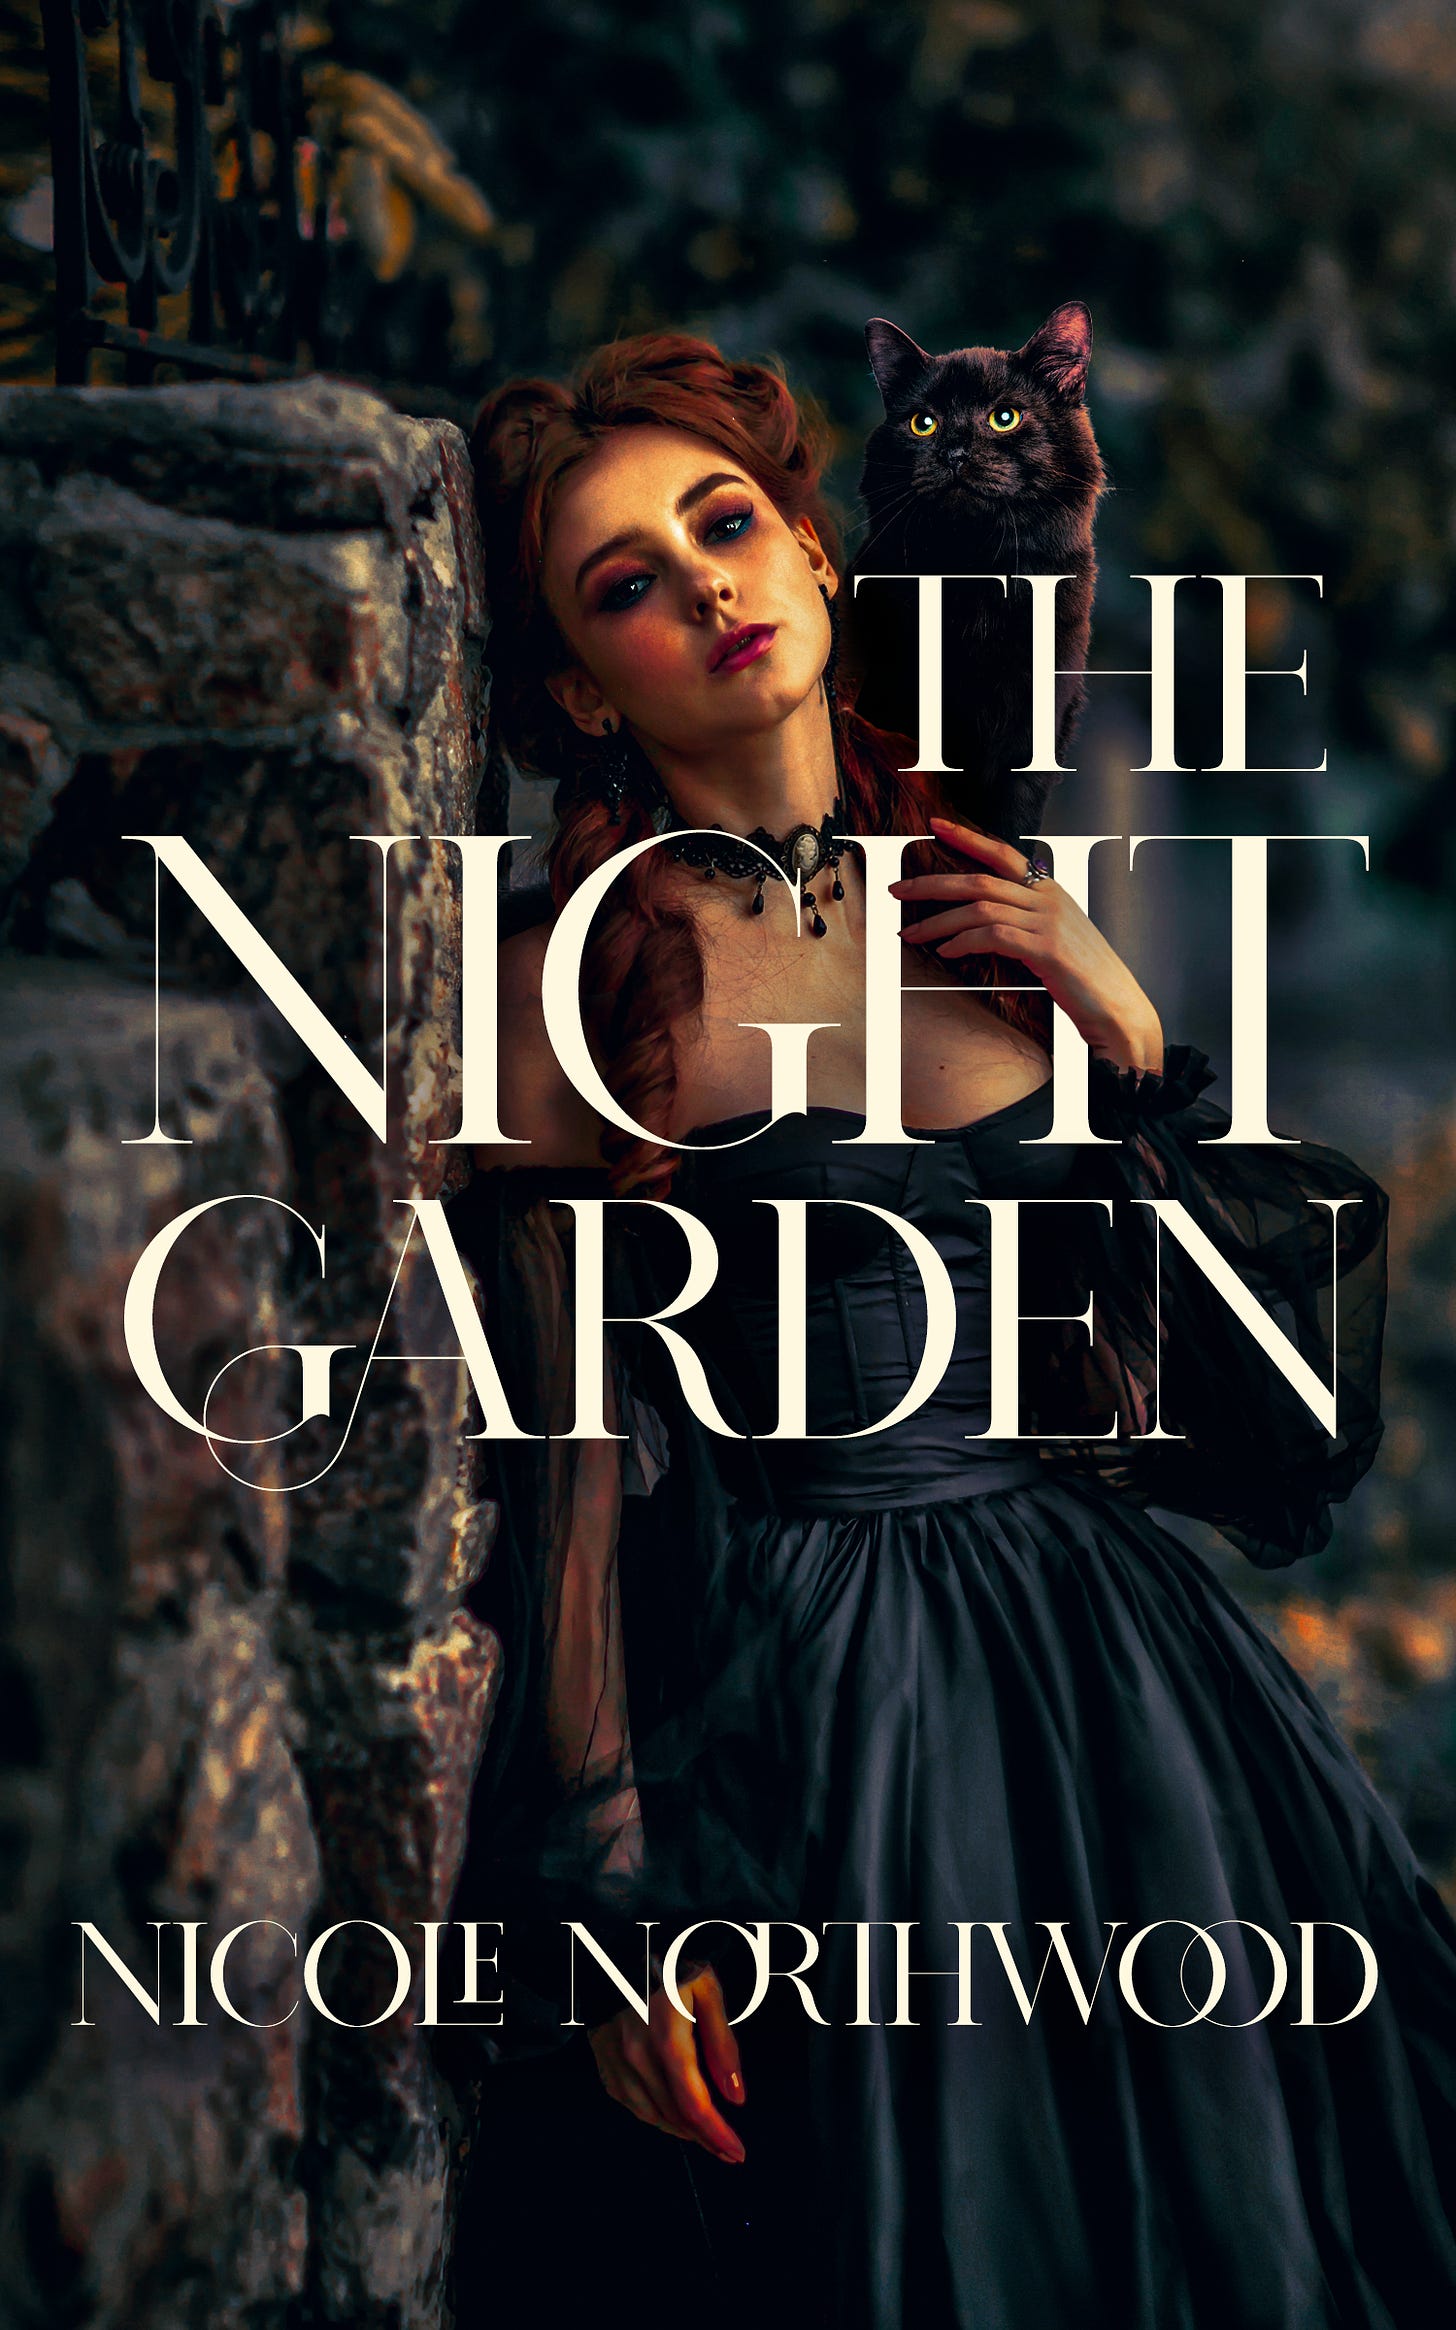 Cover of the night garden, with a redhead woman in a green dress with a black cat on her shoulder